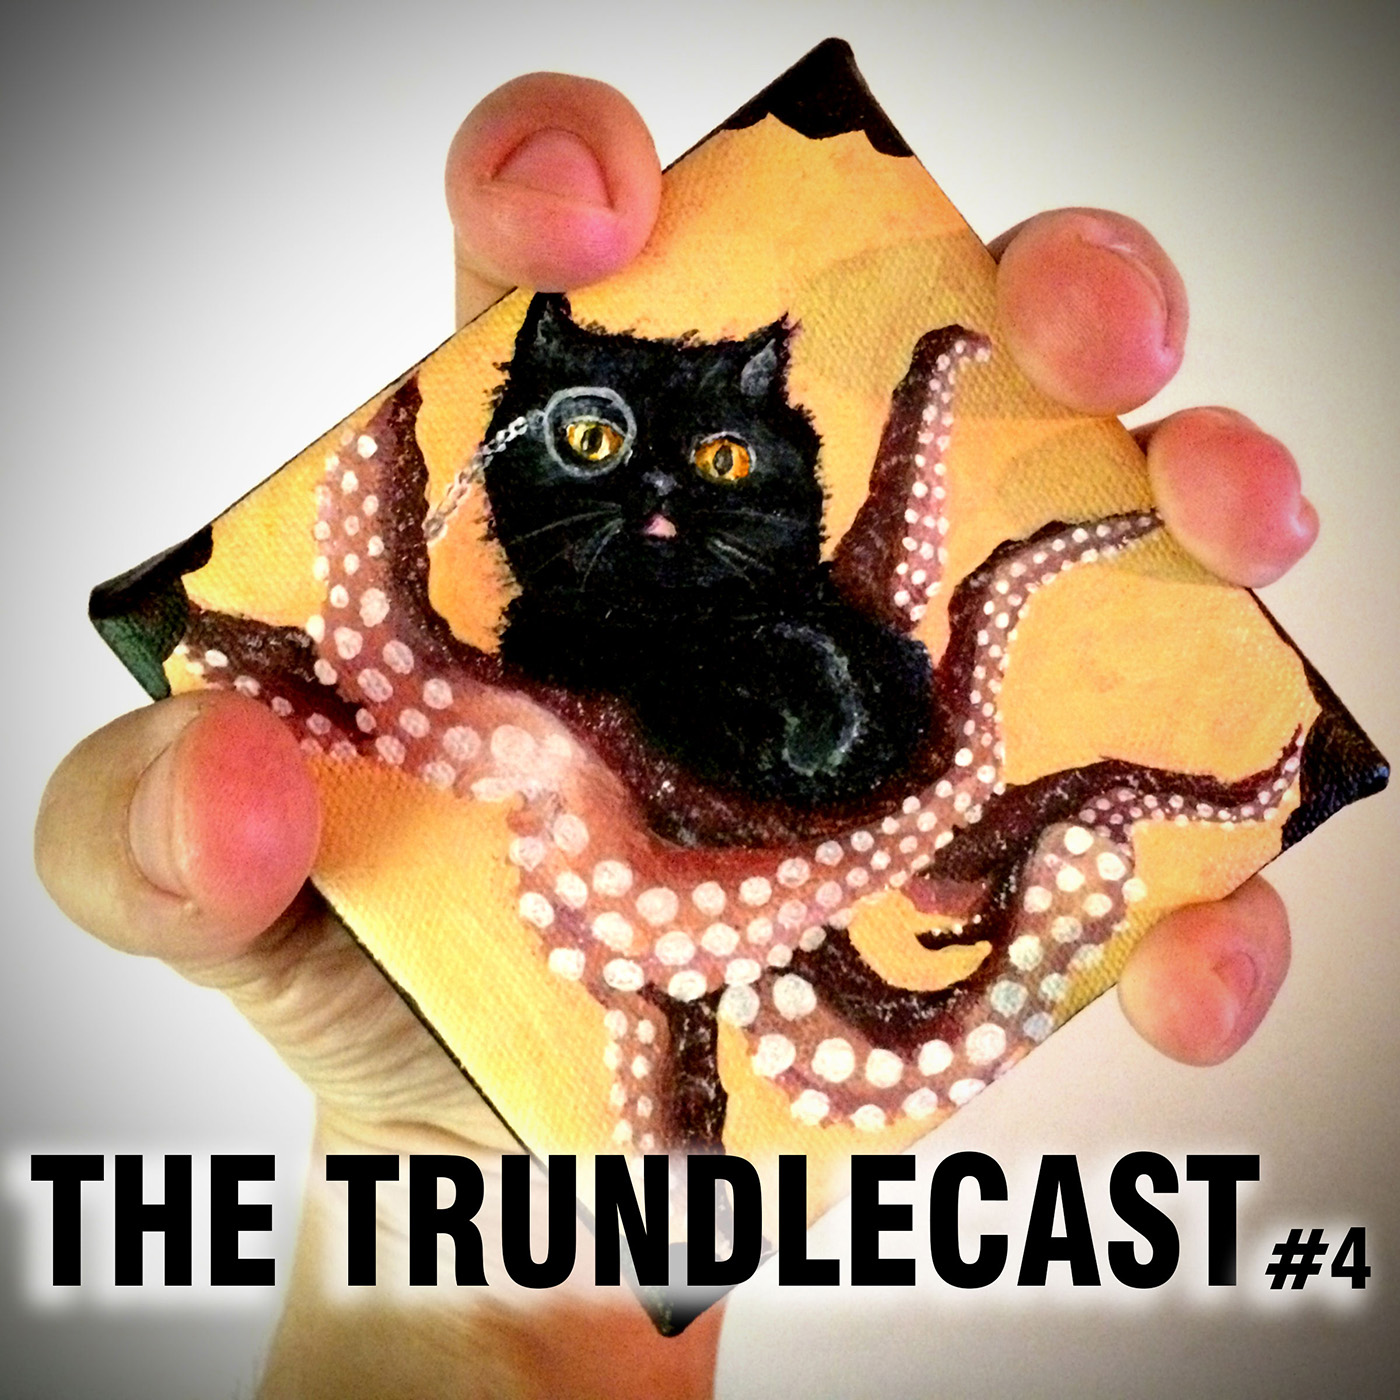 The 4th Trundlecast!